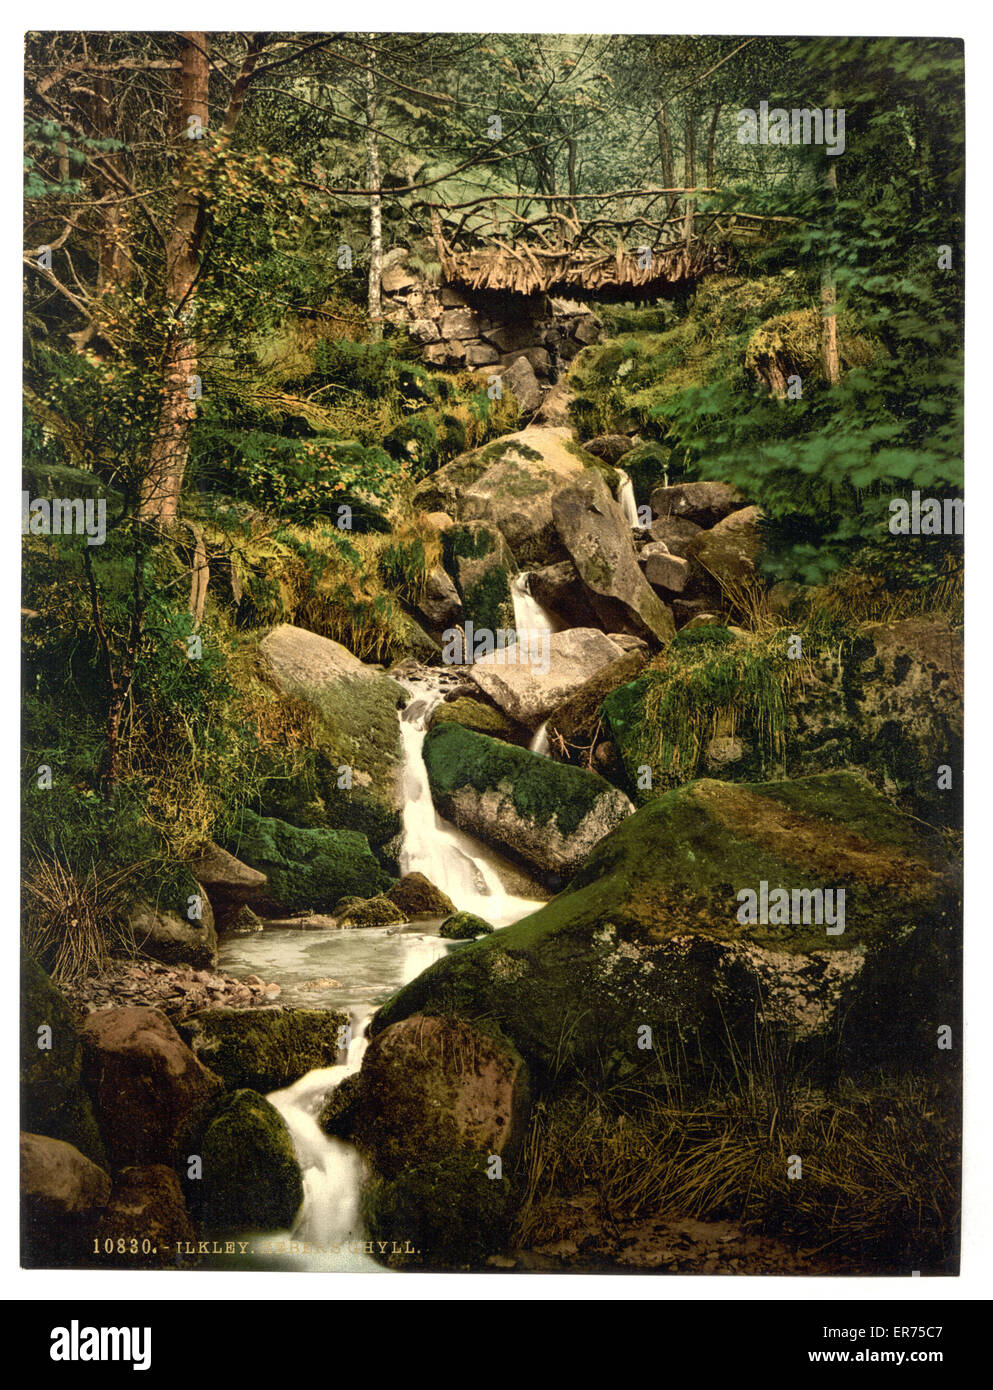 Heber's Ghyll, Ilkley, Angleterre Banque D'Images